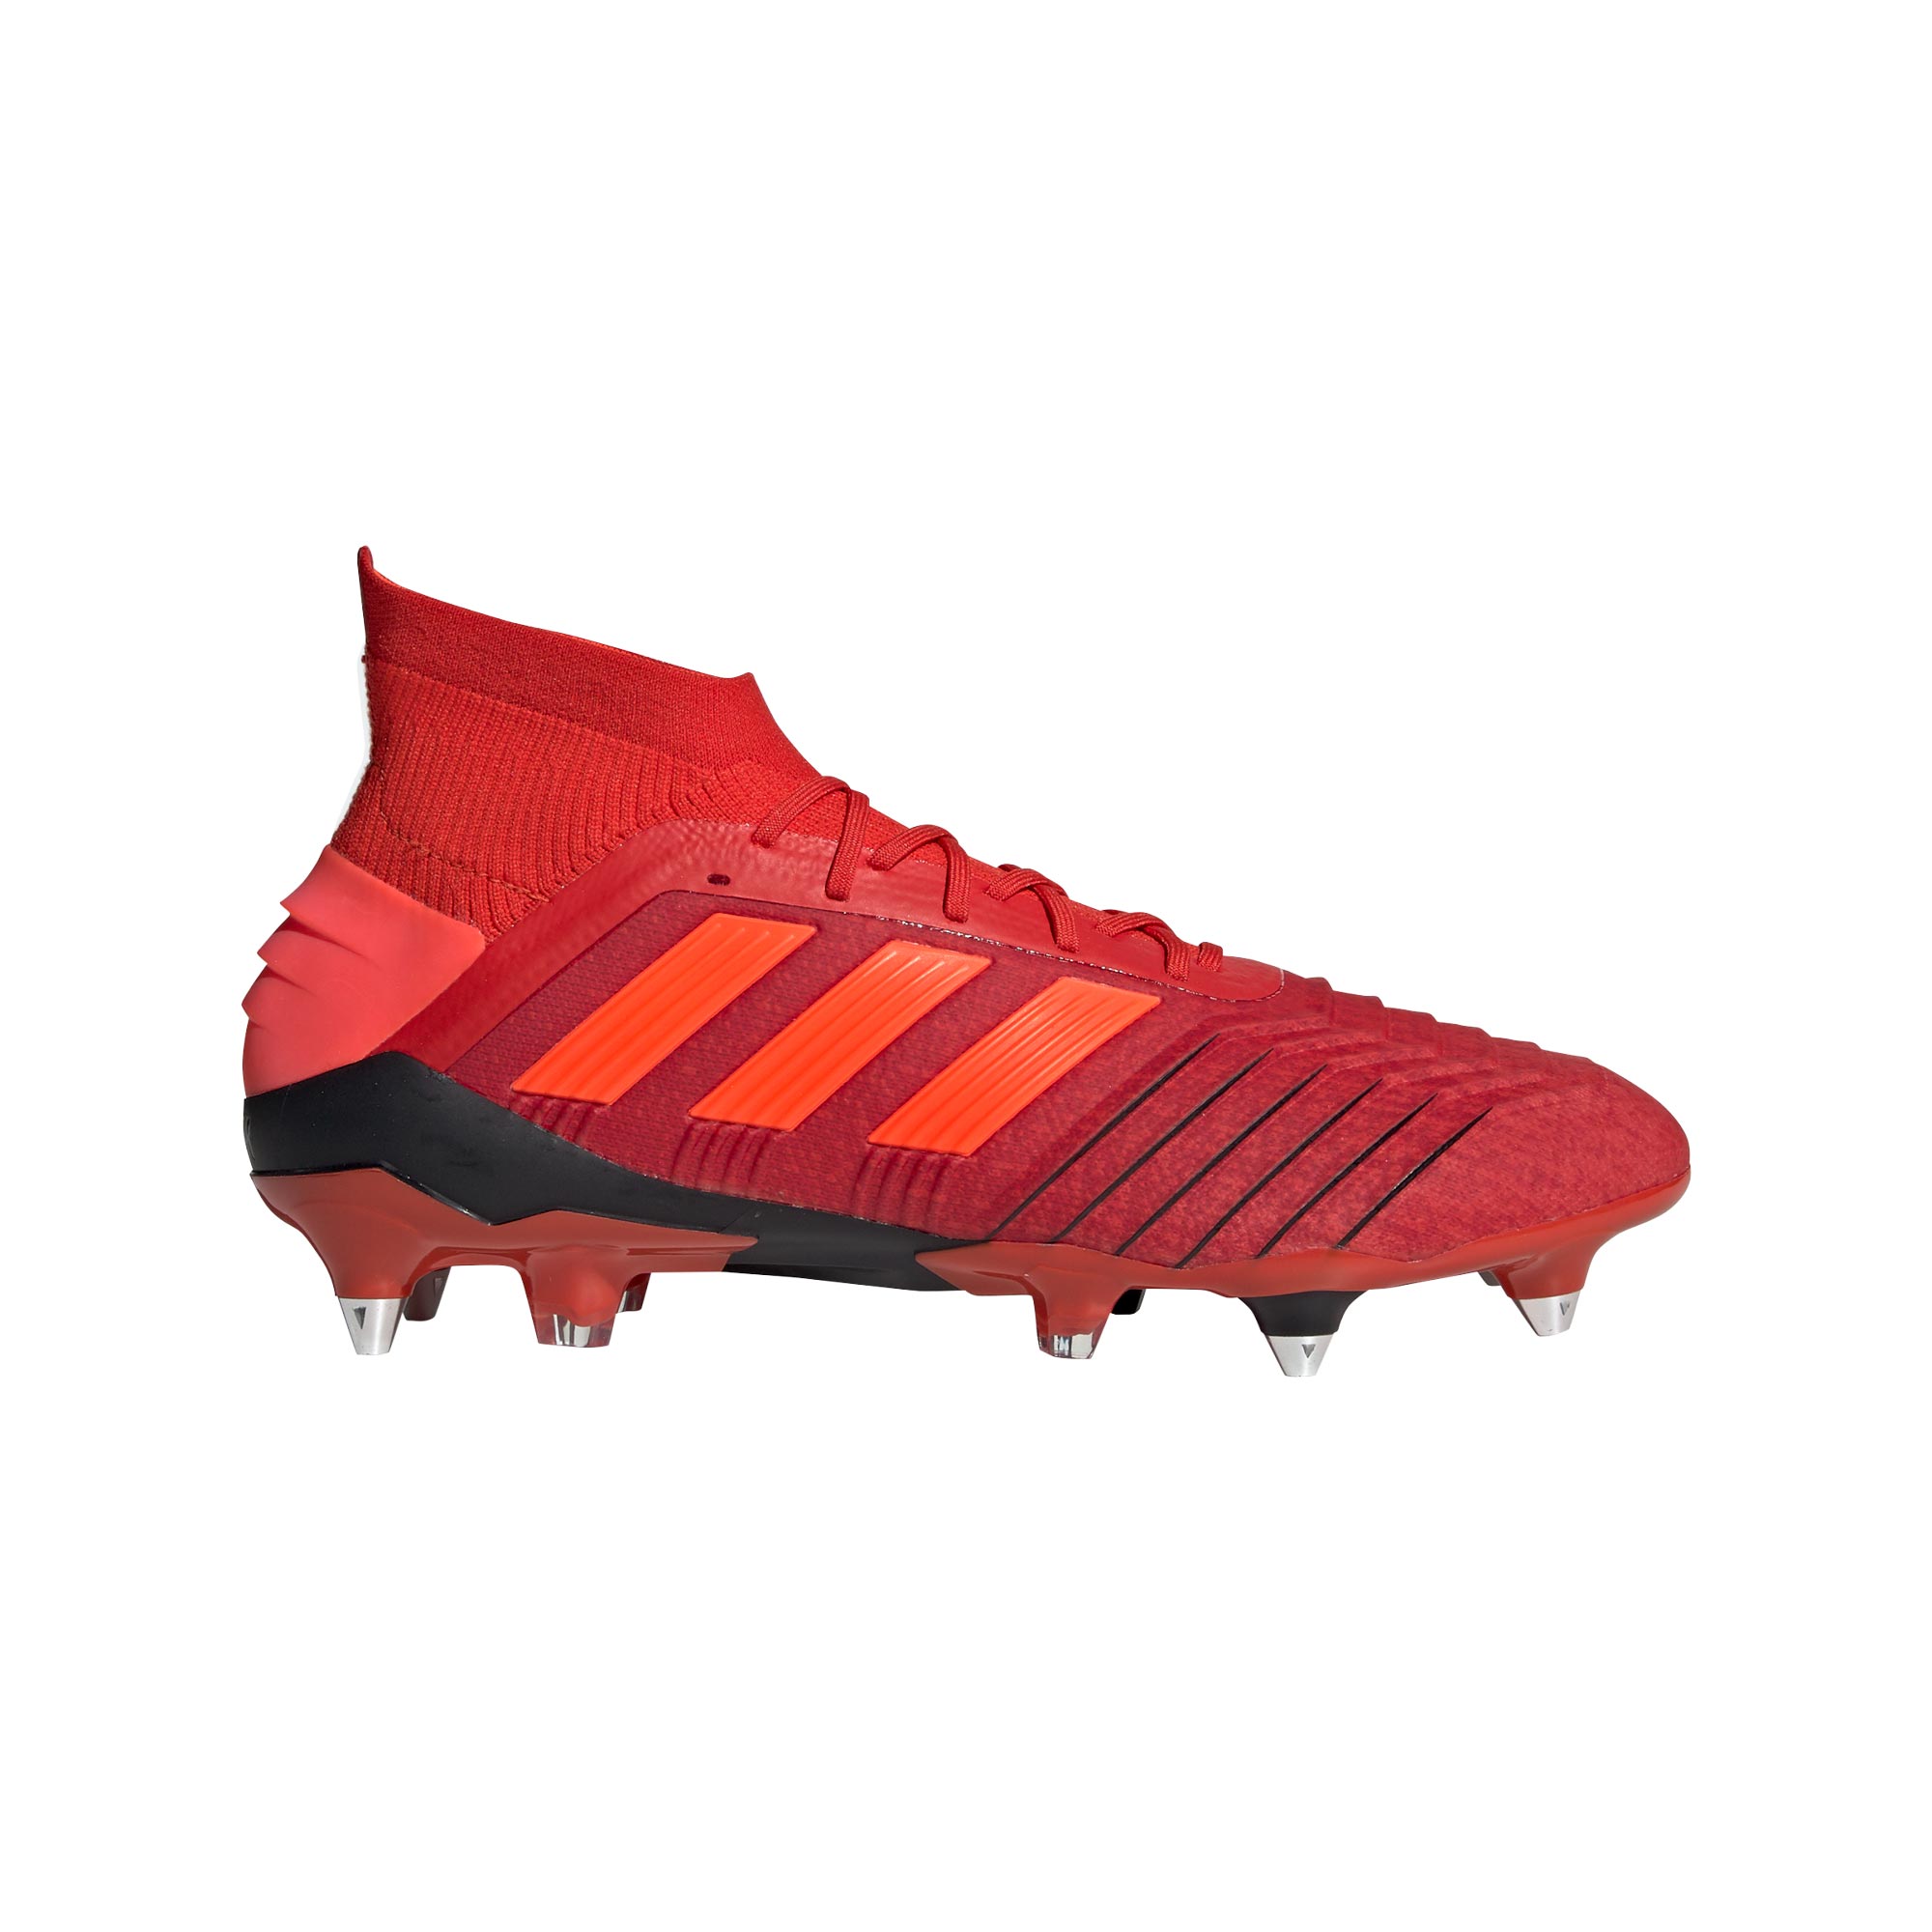 adidas Predator 19.1 SG Adults - active red/solar red